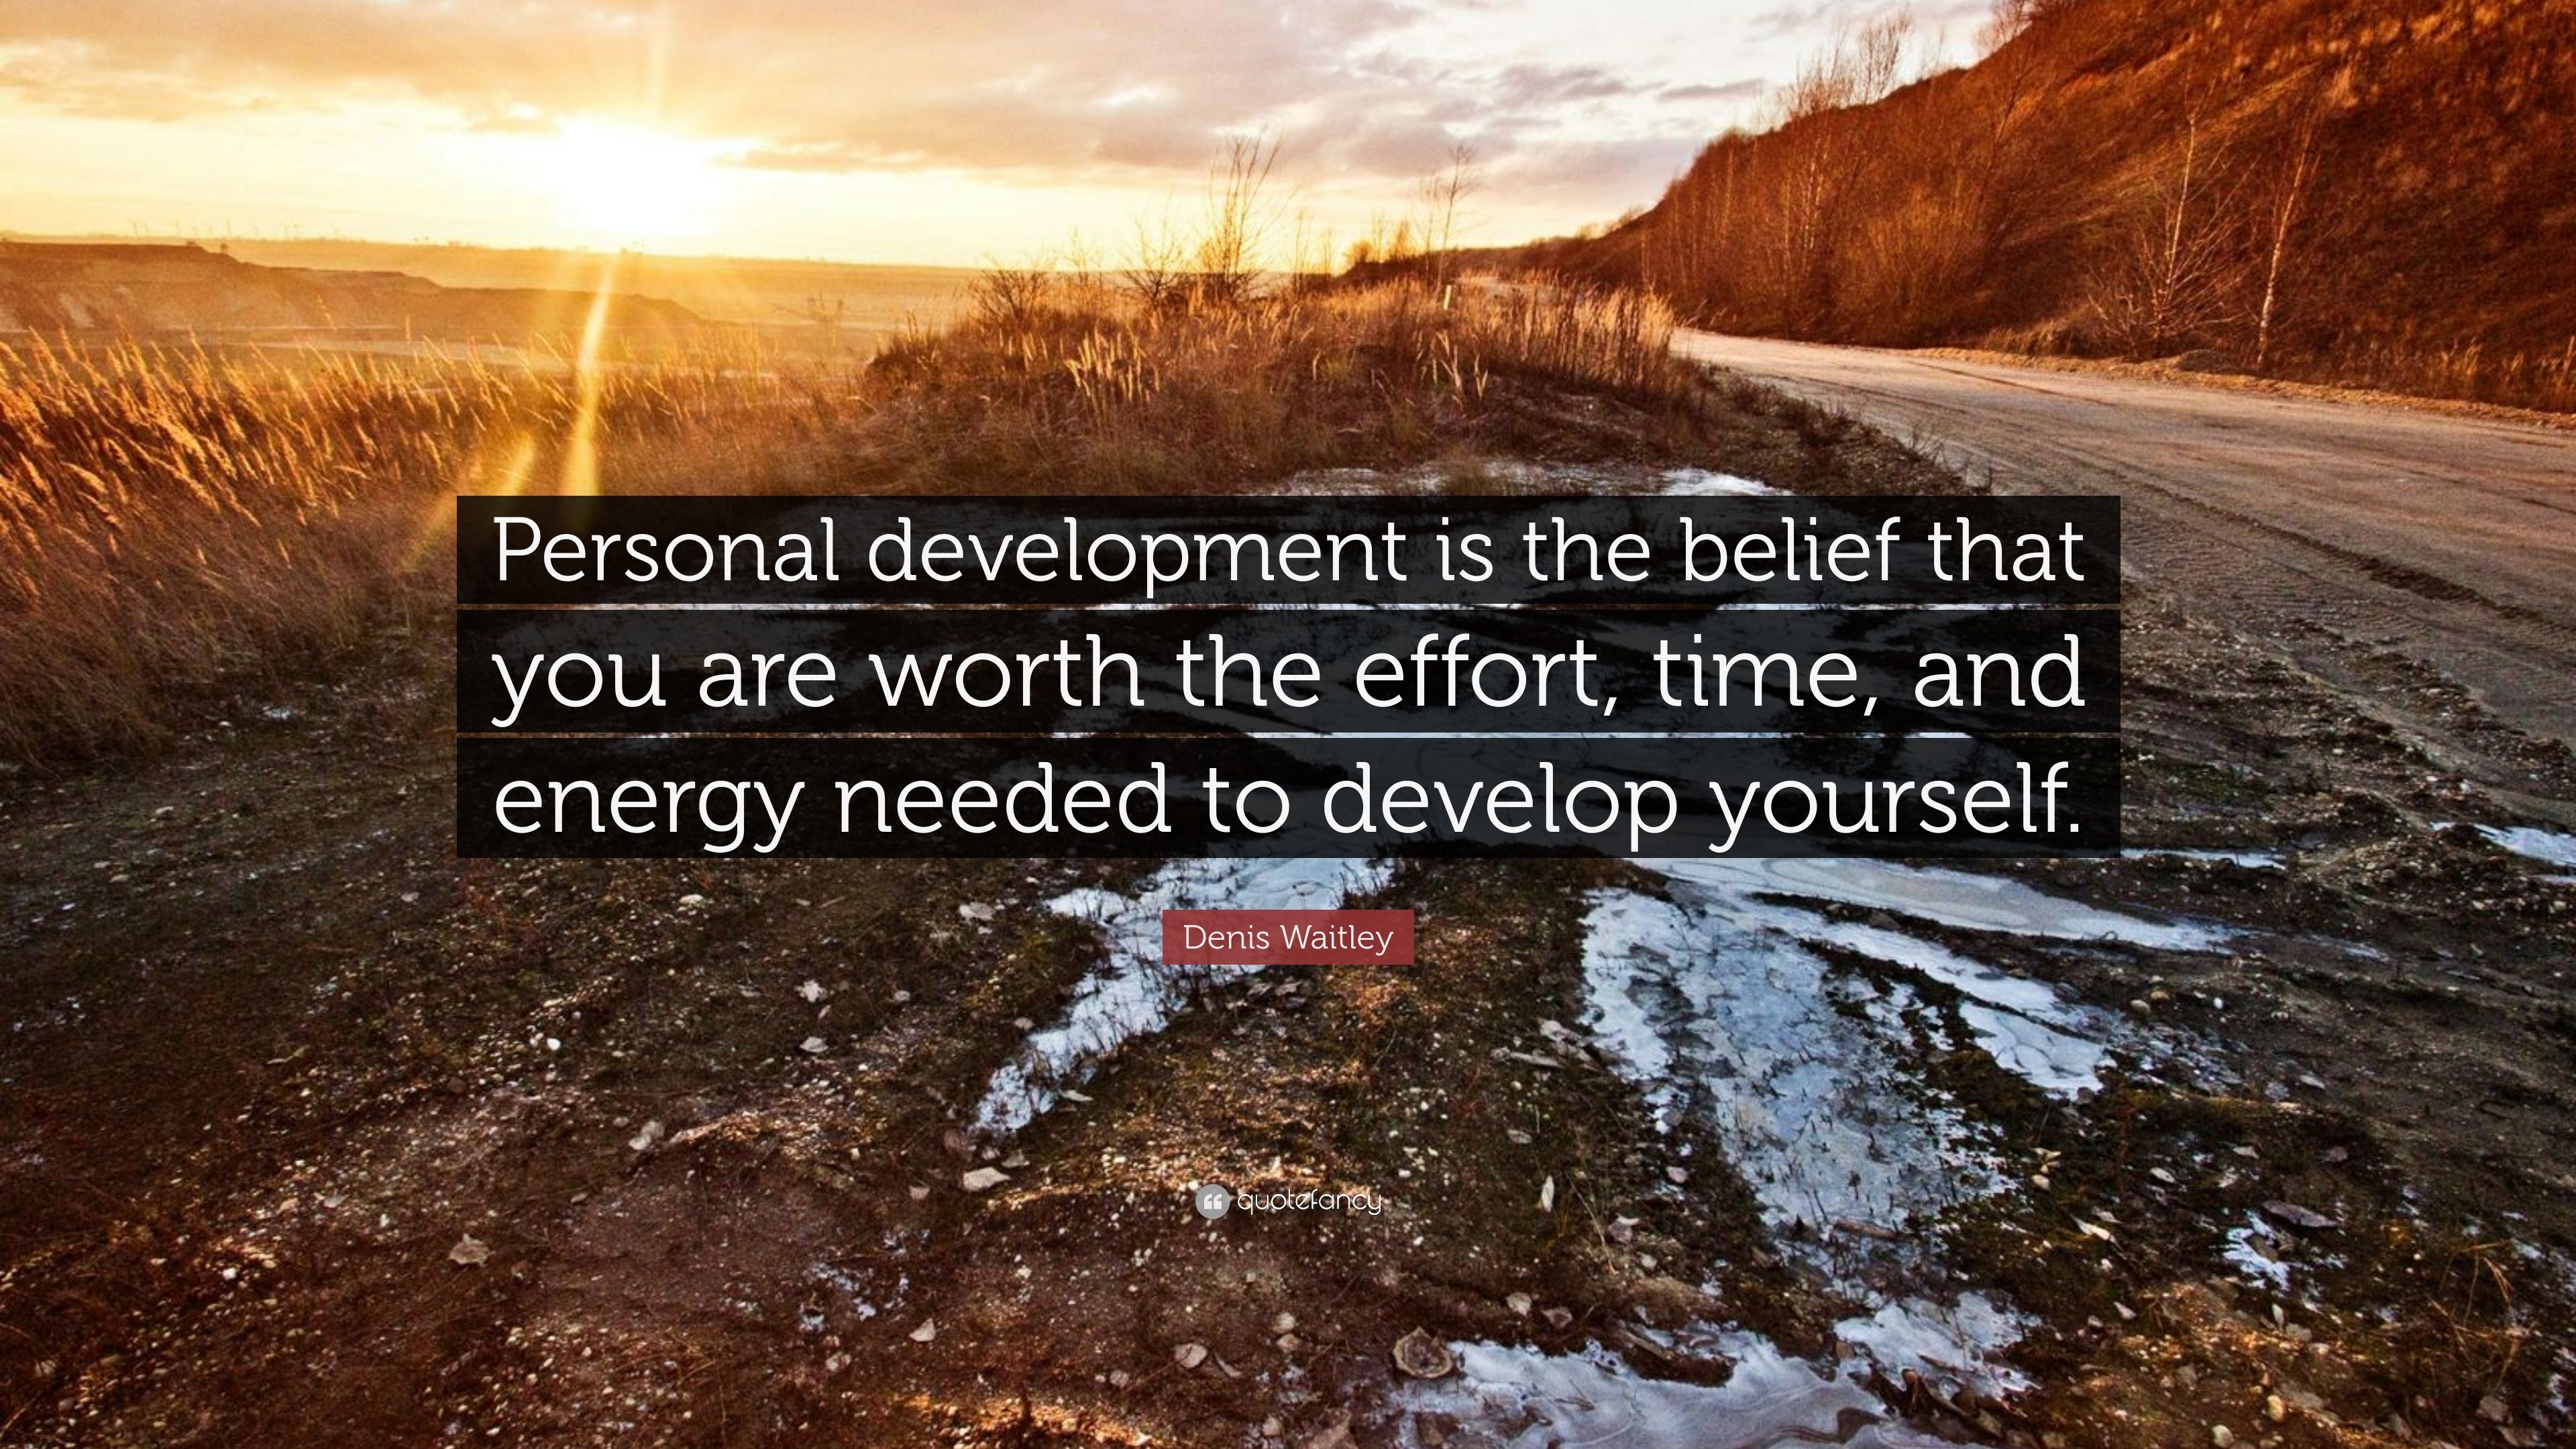 Denis Waitley Quote: “Personal development is the belief that you